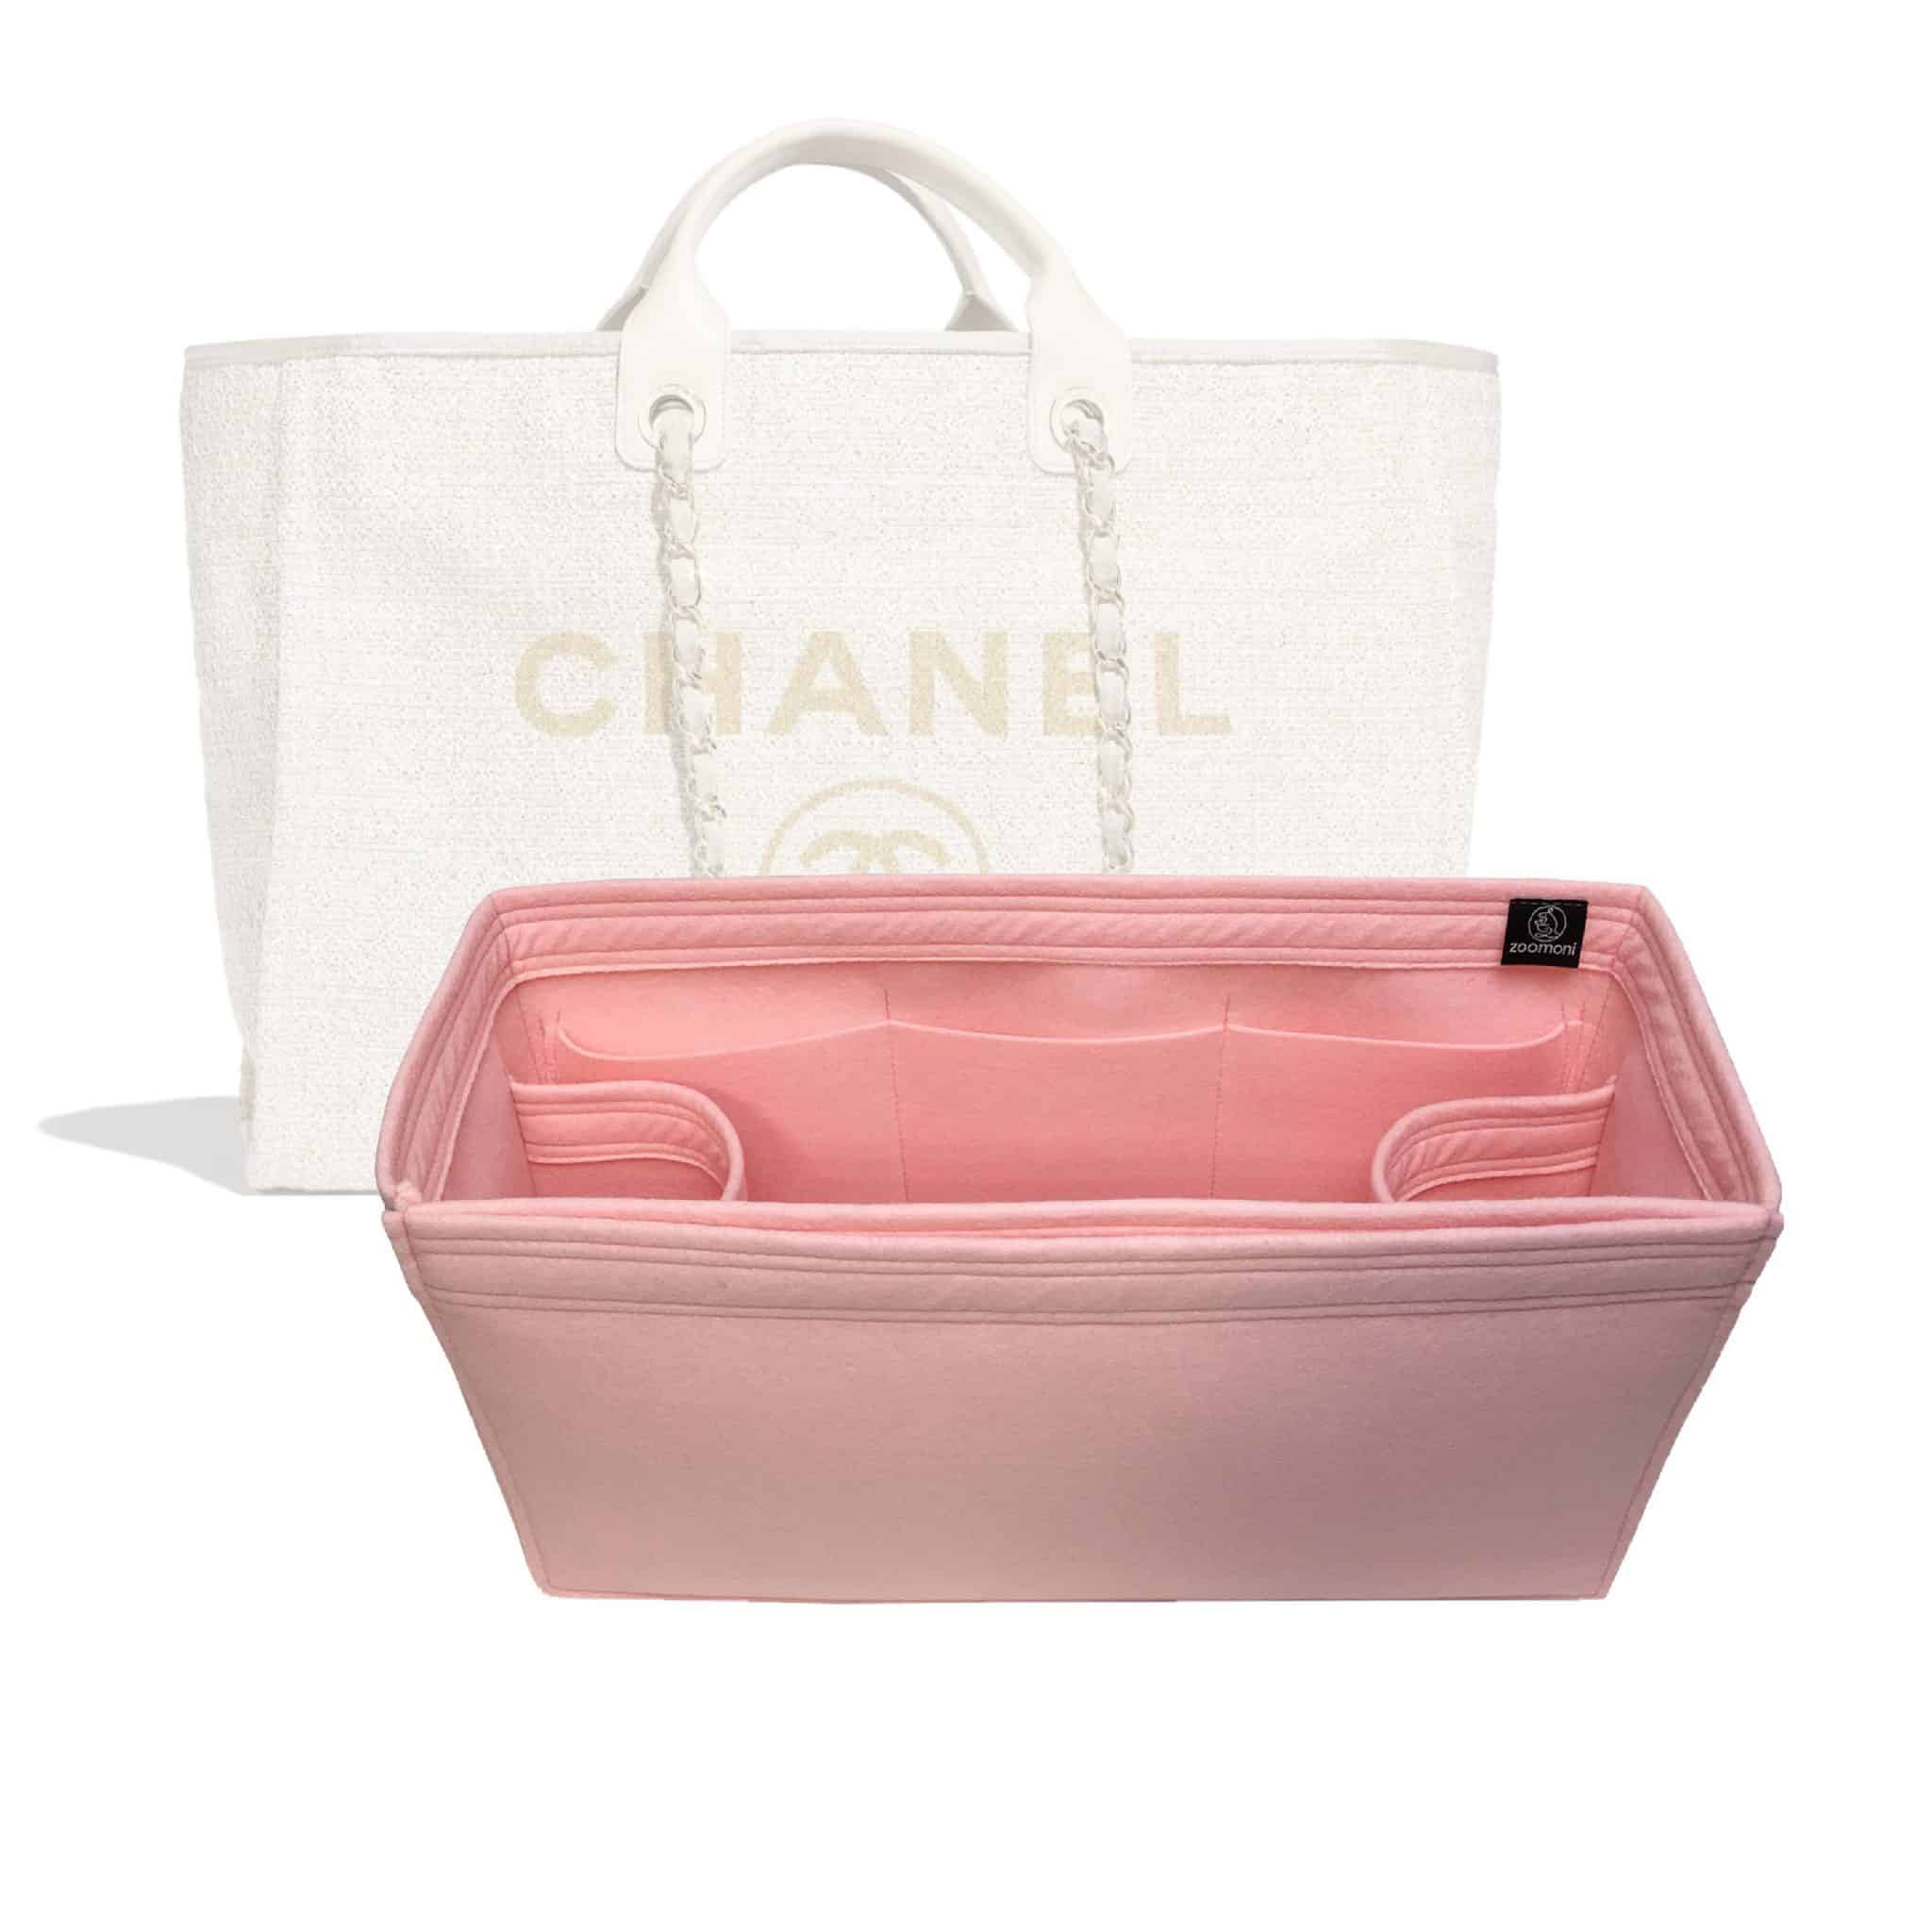 Chanel Deauville Tote Large (Type 14) Bag Organizer - Reetzy